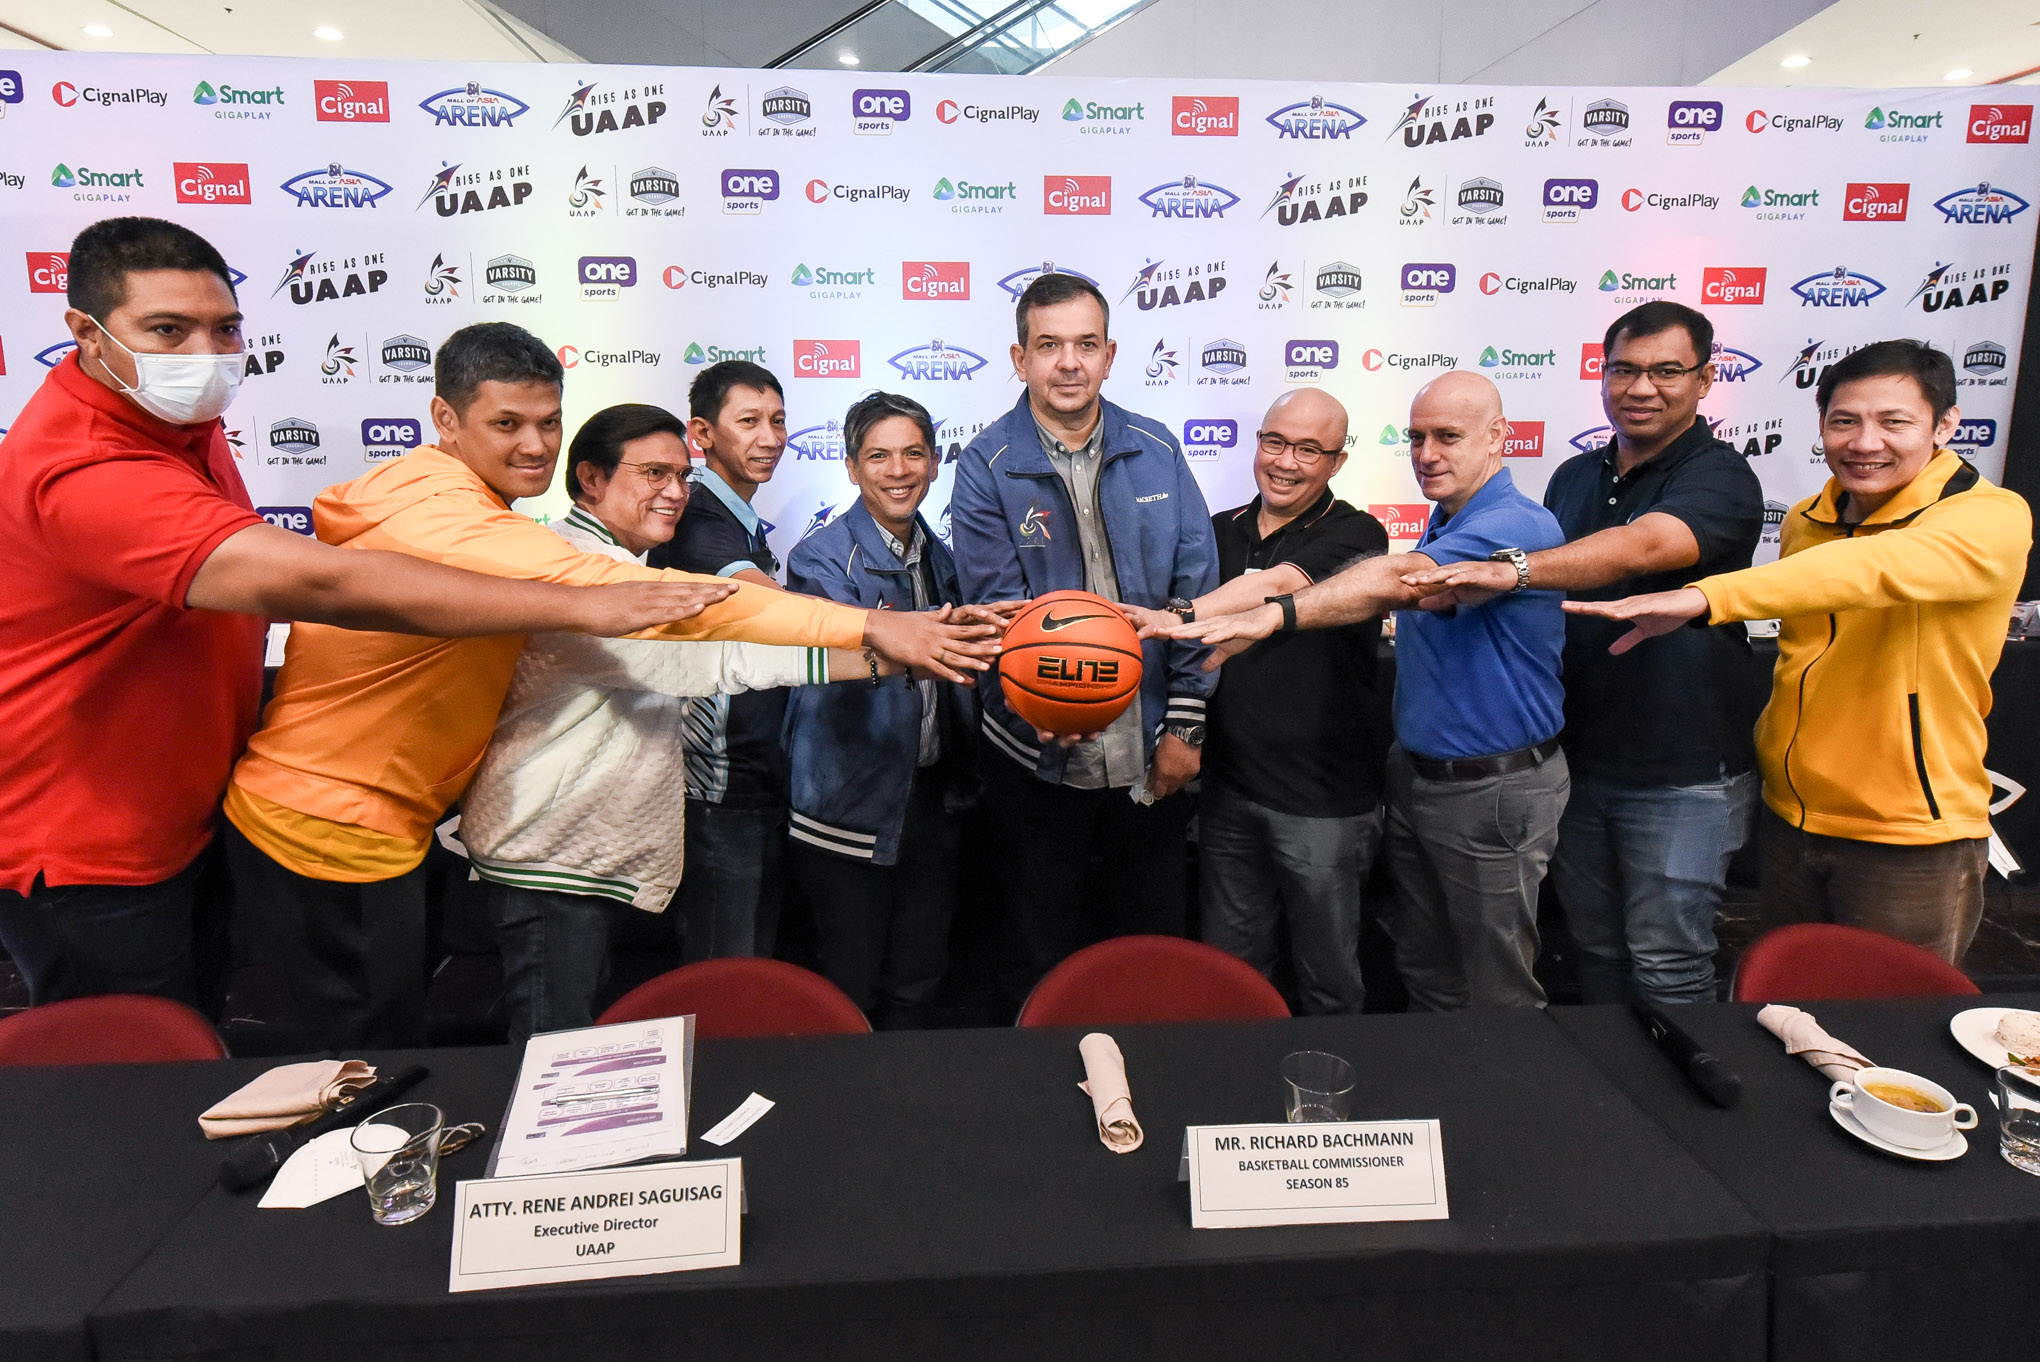 UAAP men's basketball coaches with UAAP commissioner Dickie Bachmann during the Season 85 press conference.